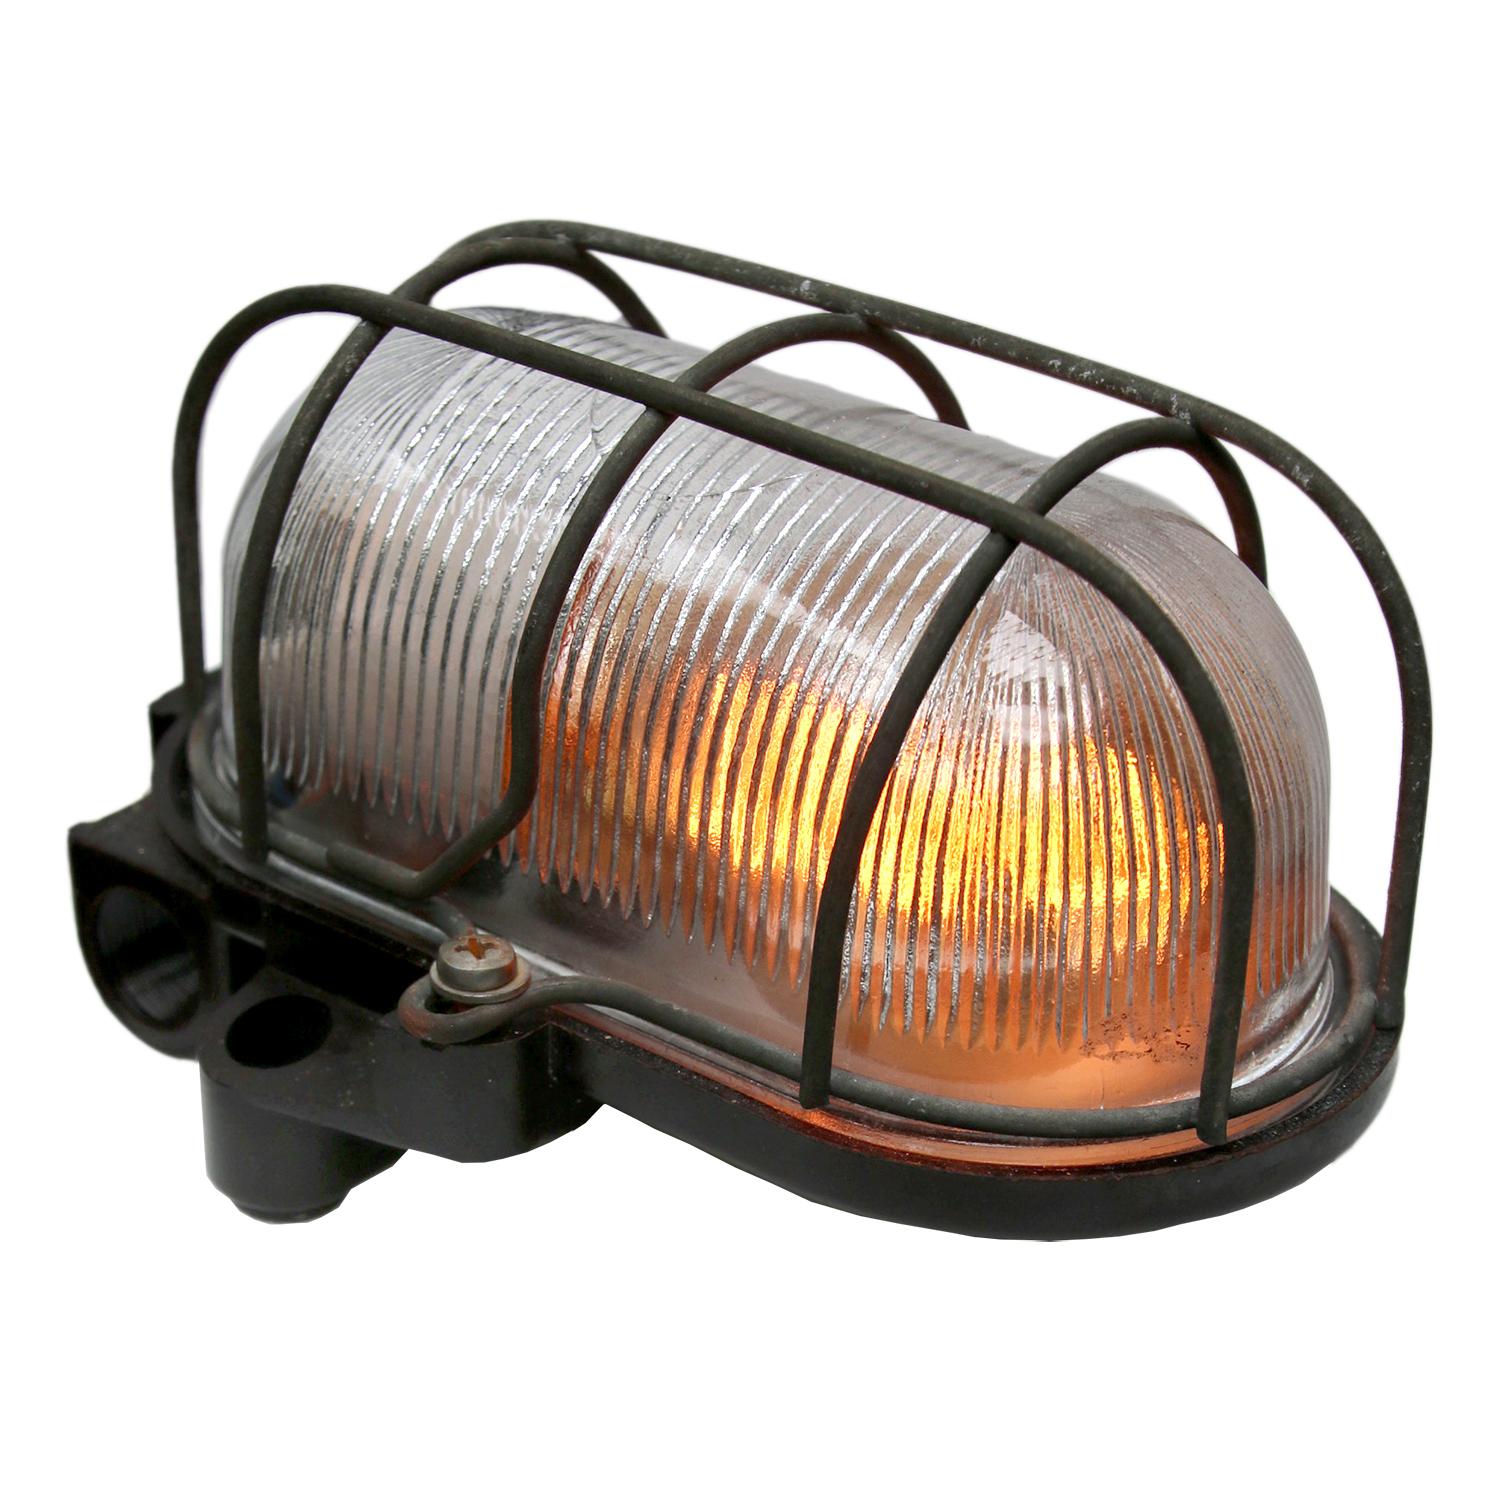 Industrial wall and ceiling scone. Bakelite back. Holophane striped glass.
Metal wire frame.

Weight: 0.8 kg / 1.8 lb

Priced per individual item. All lamps have been made suitable by international standards for incandescent light bulbs,